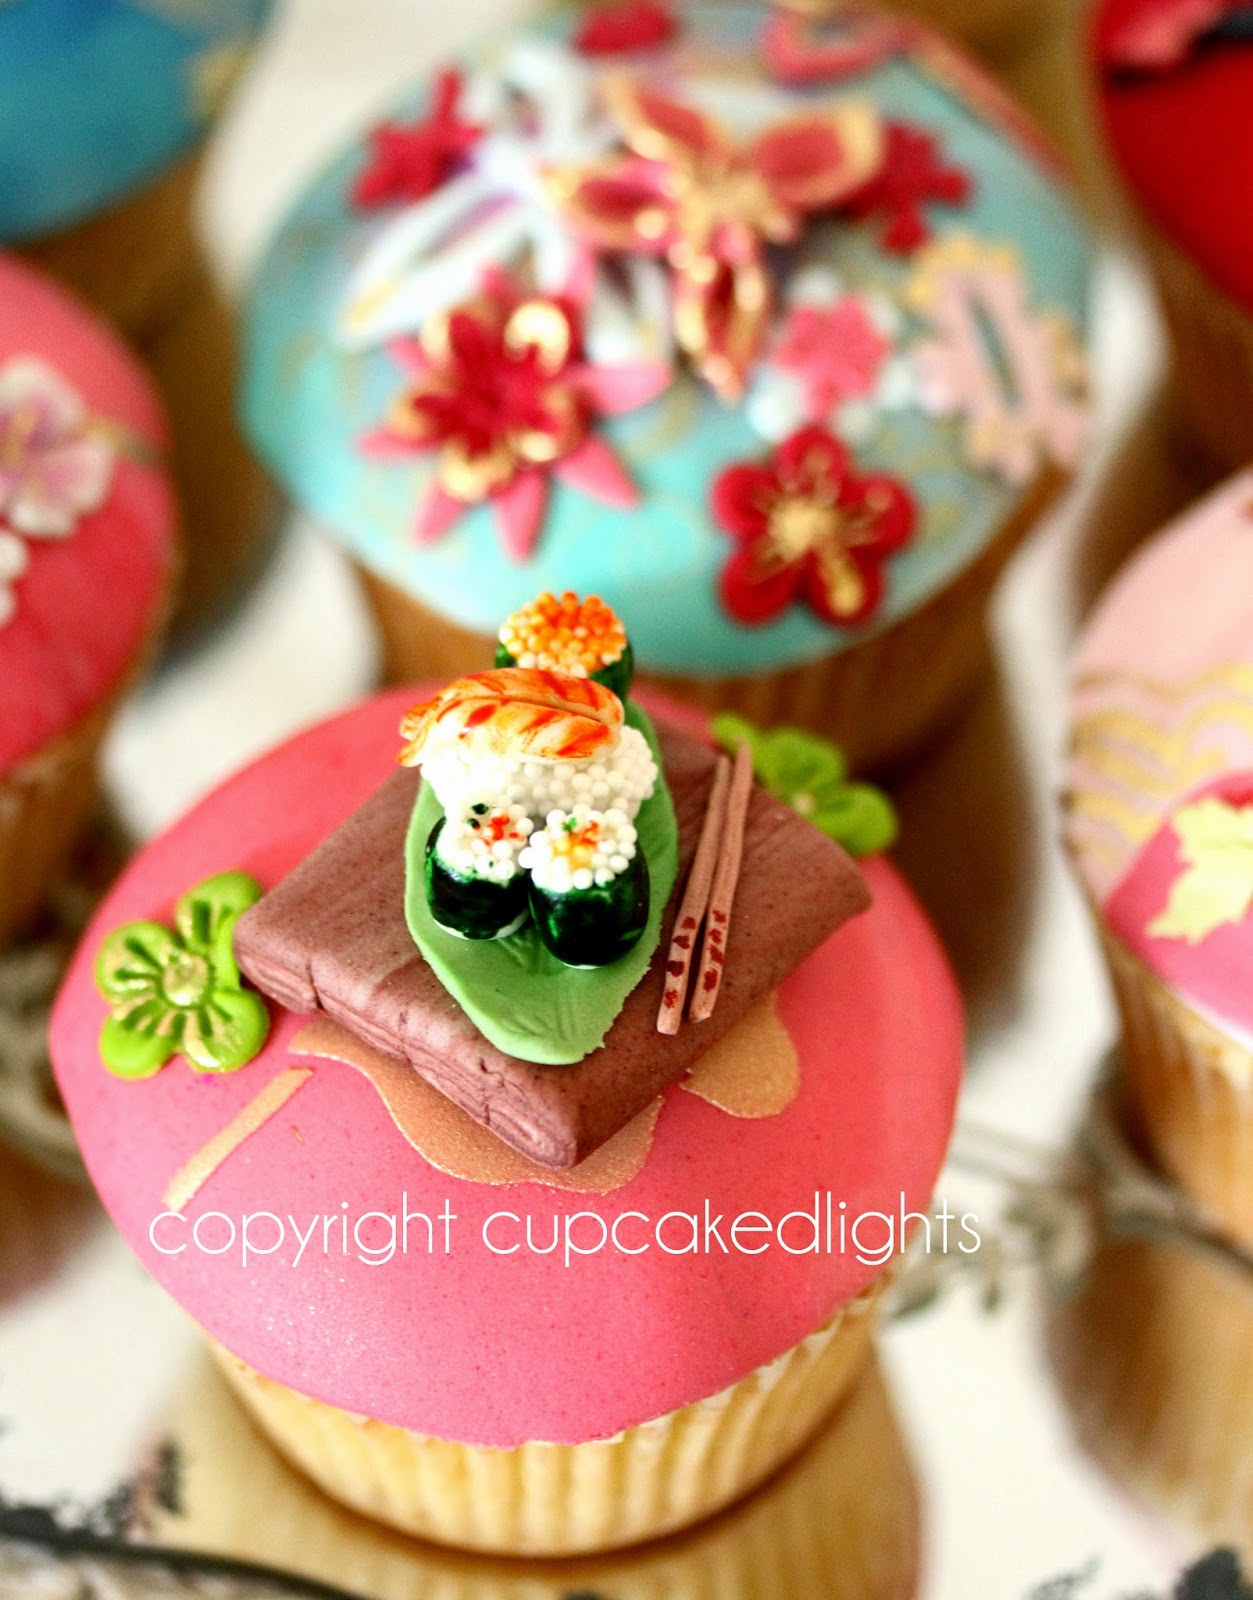 cupcake d'lights {South Africa}: japanese inspired cupcakes